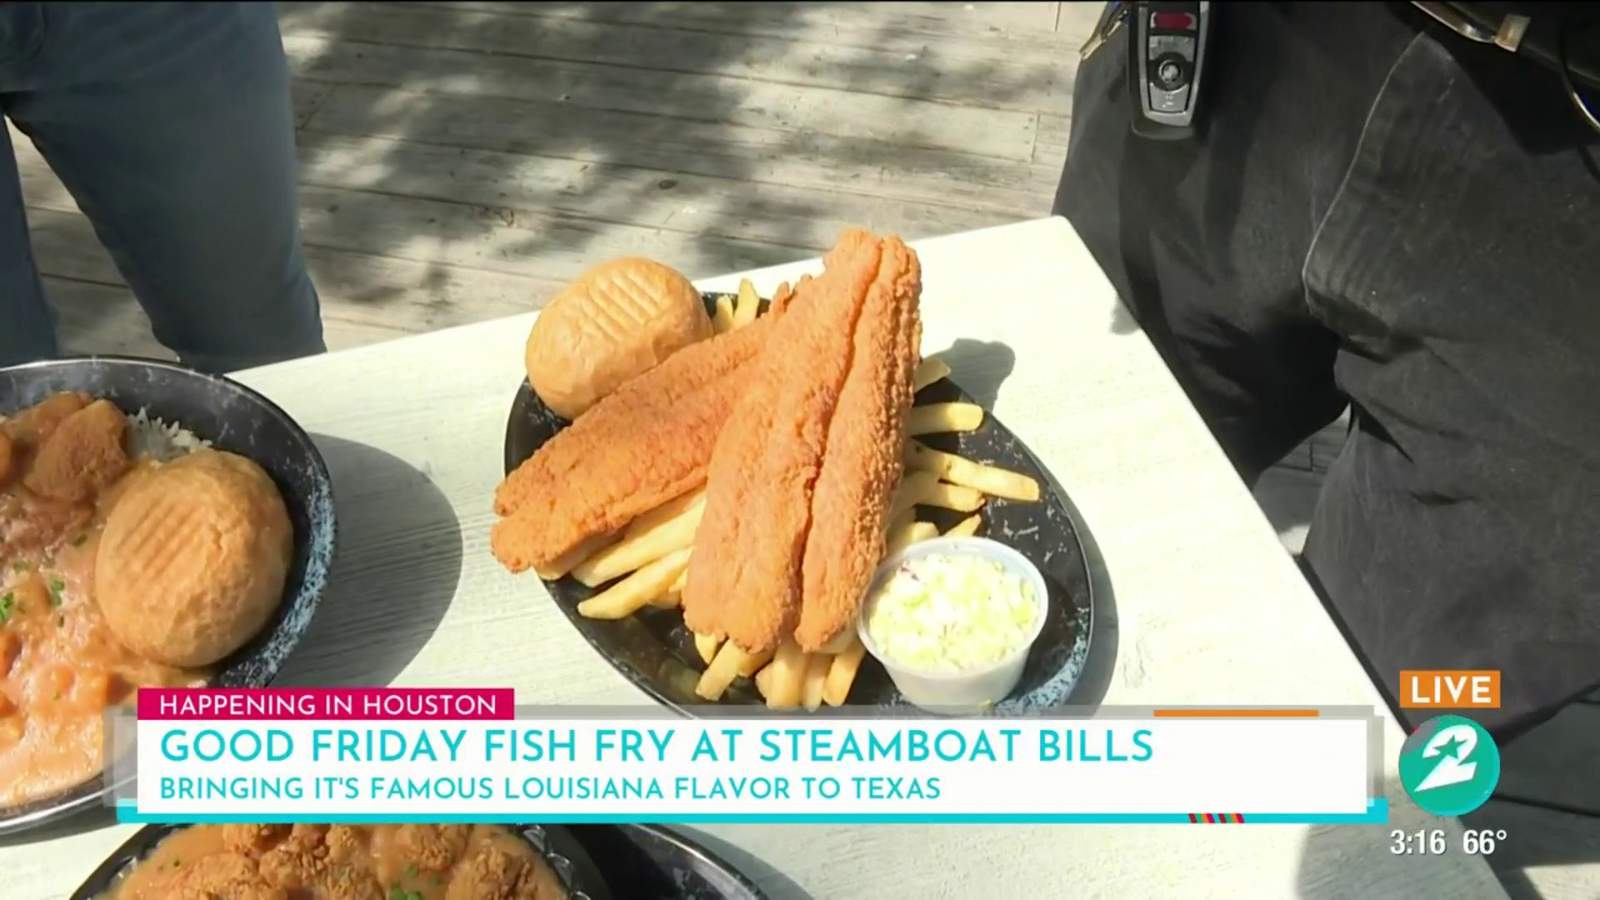 Celebrate Good Friday with a tasty fish fry at Steamboat Bills